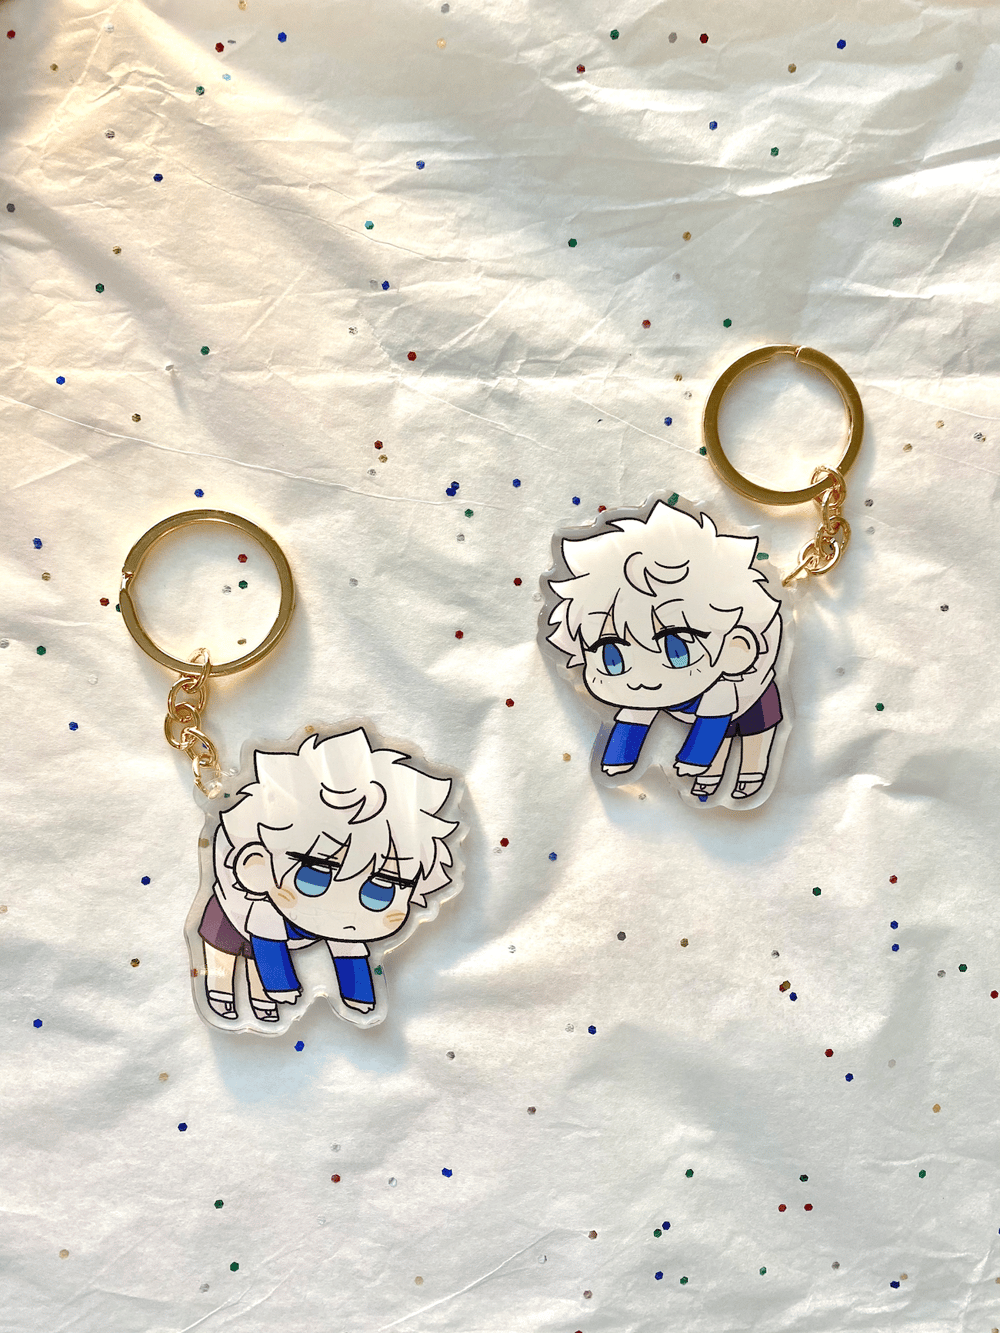 dangly hxh charms!